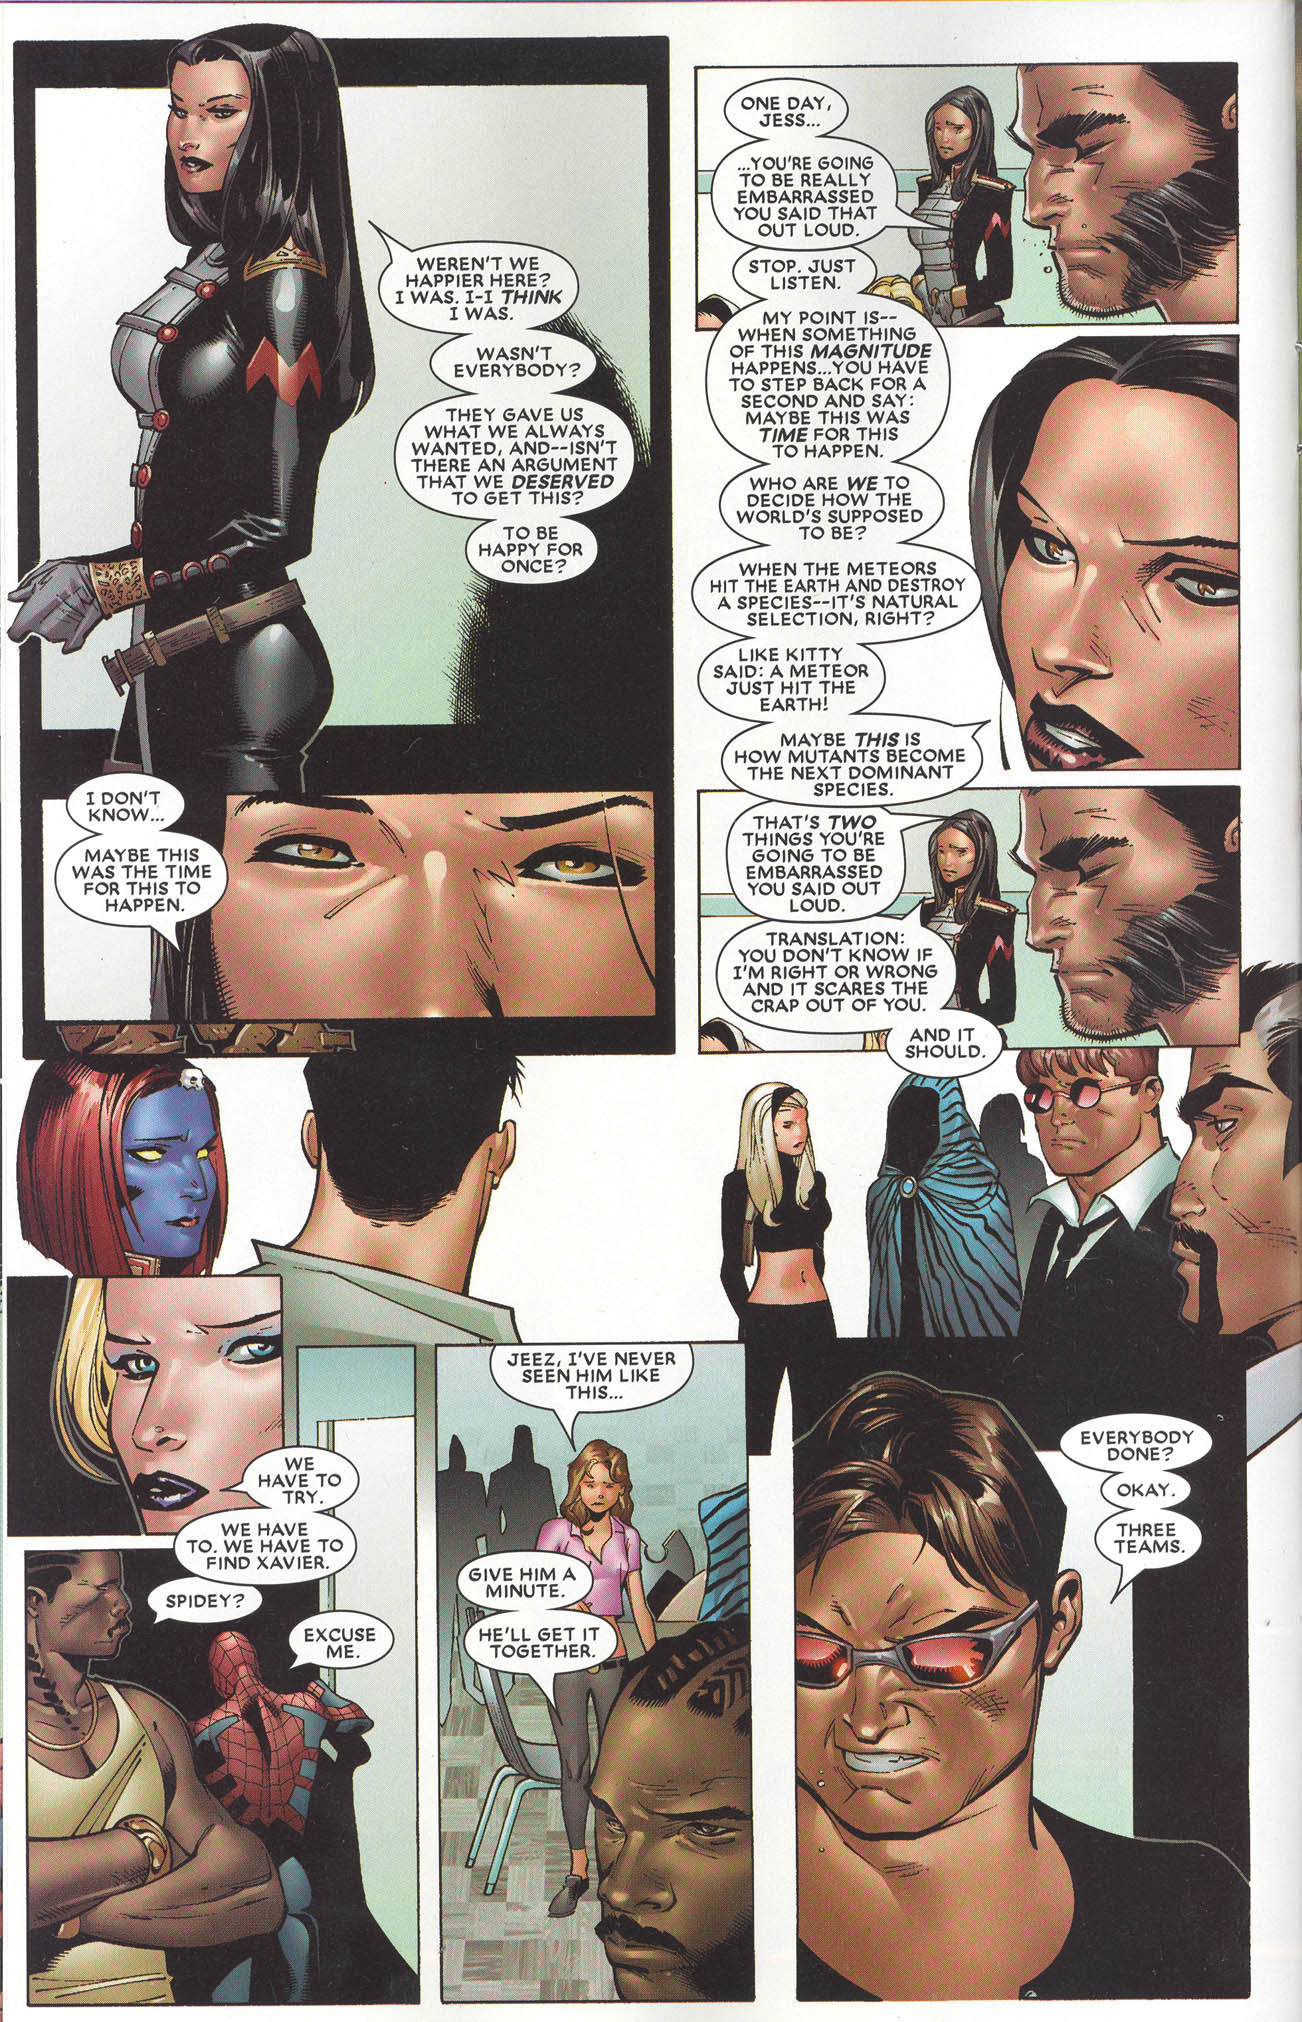 House of M 6 of 8